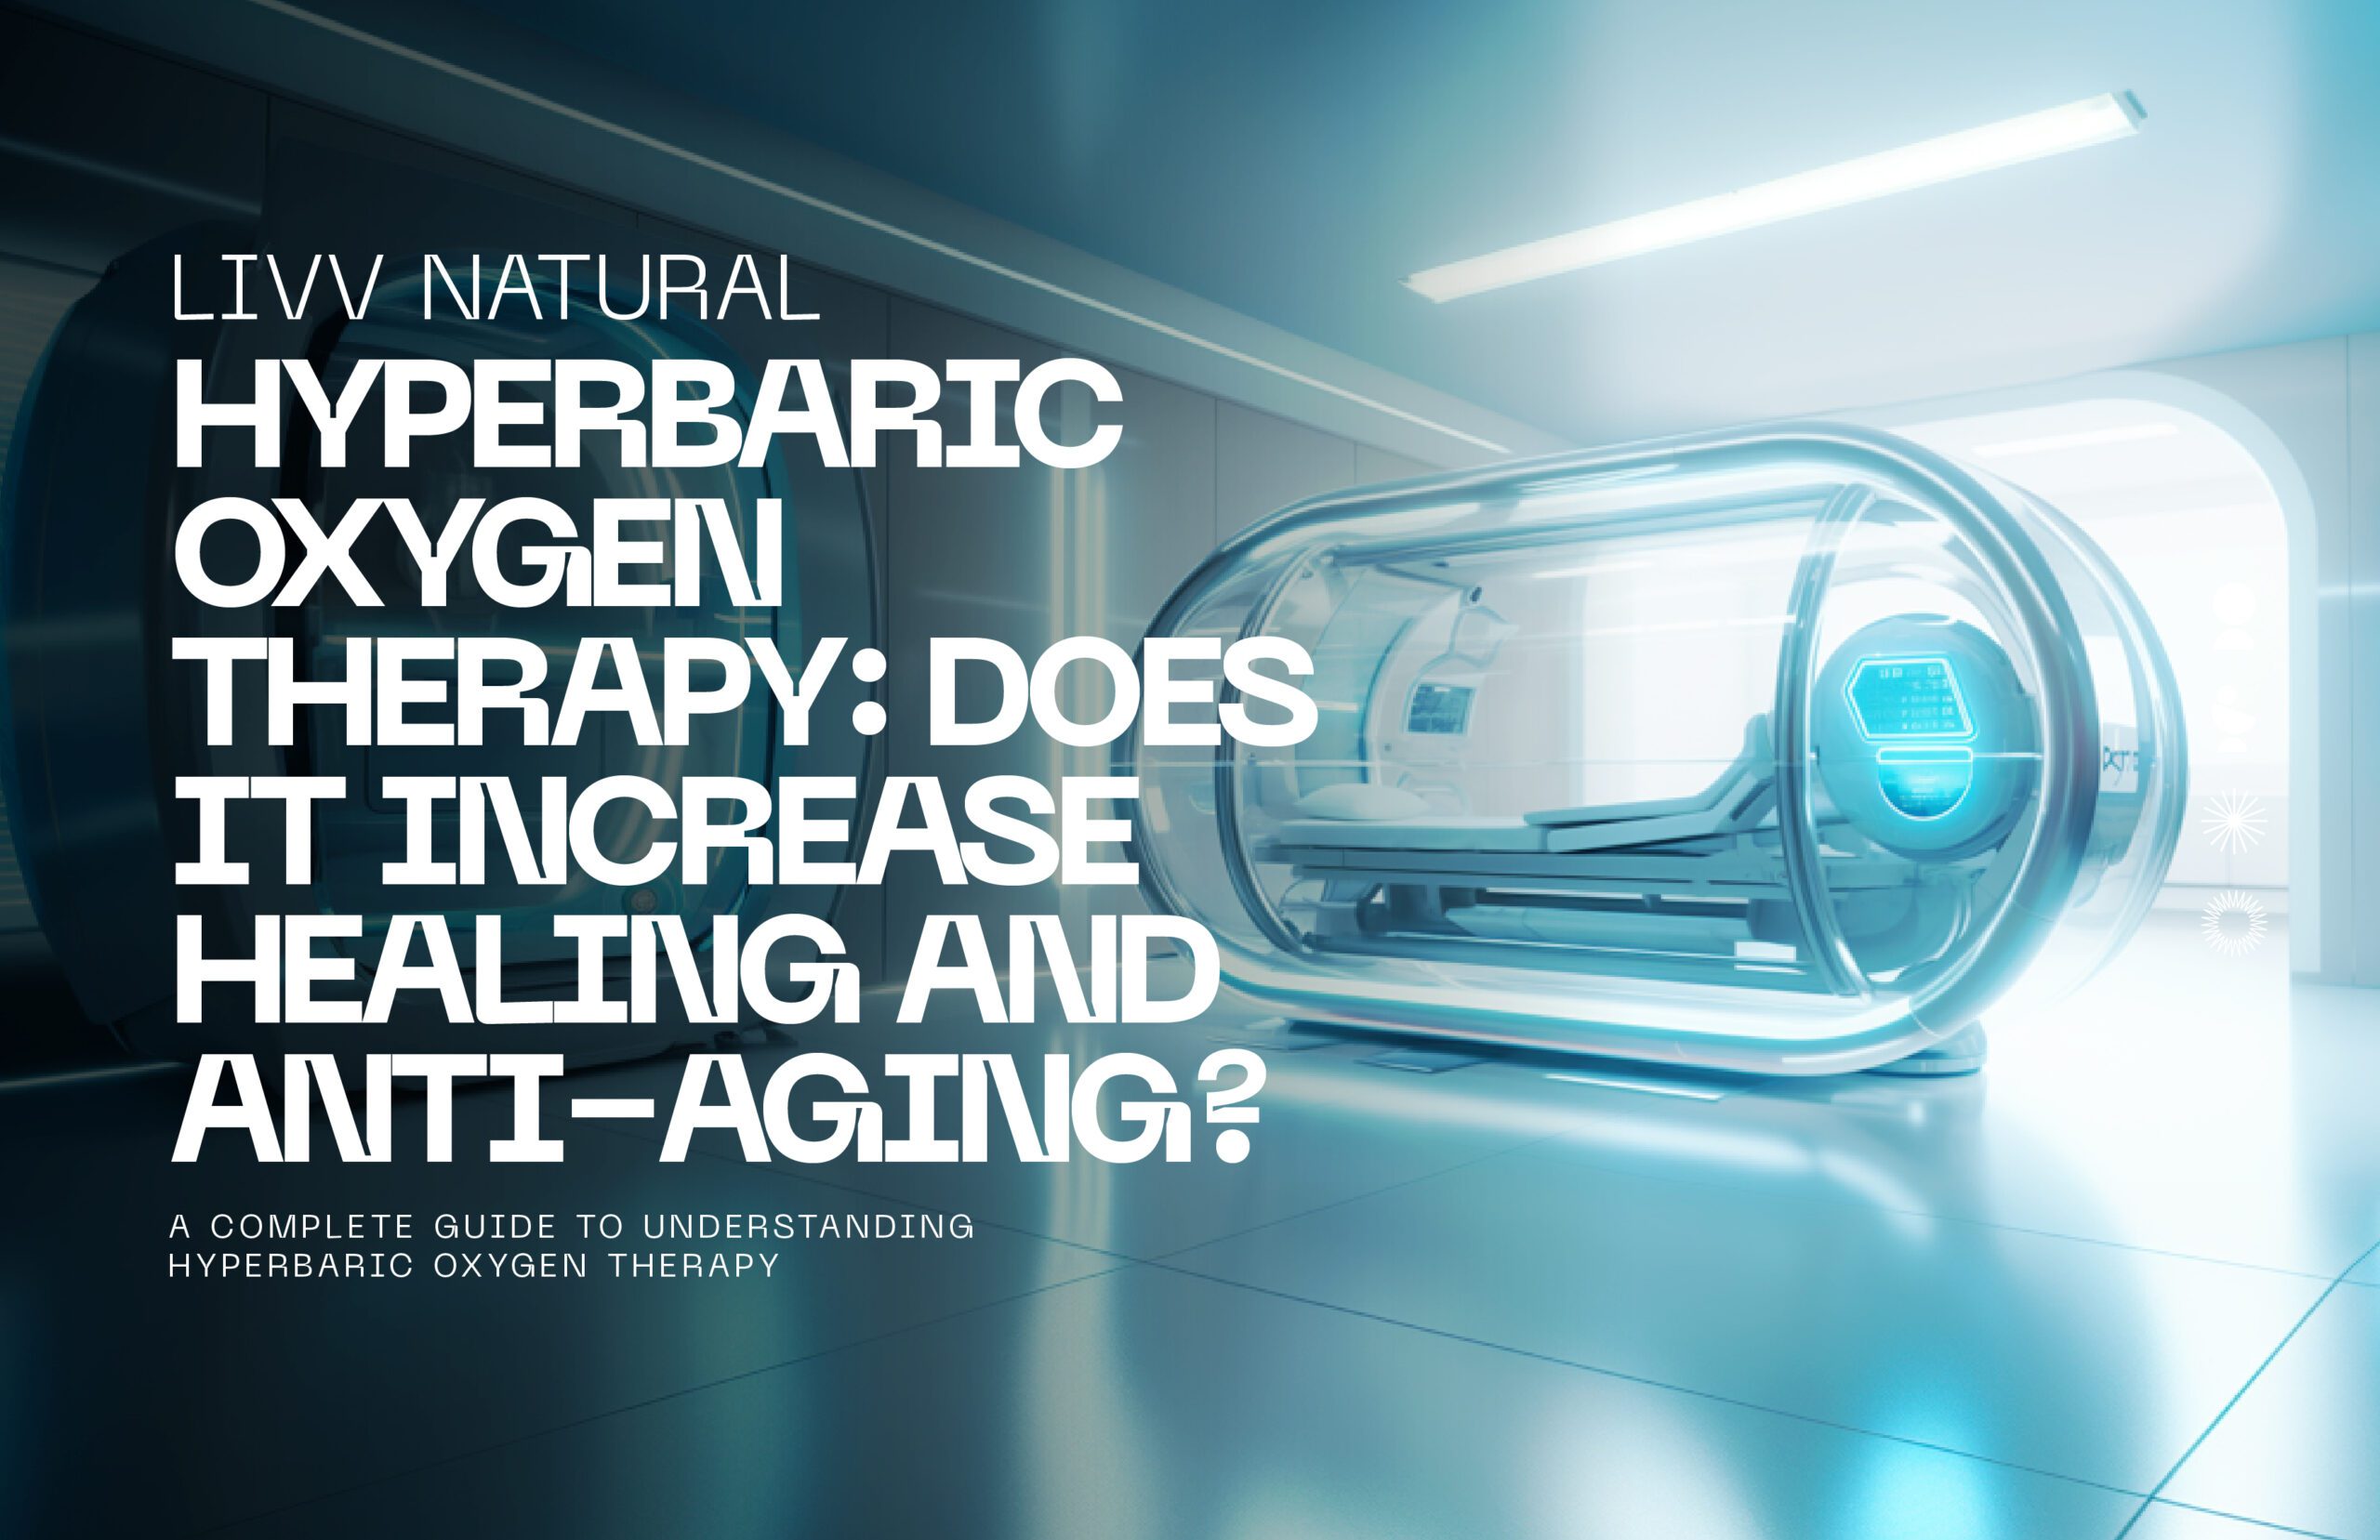 Hyperbaric oxygen therapy – increase healing and anti-aging